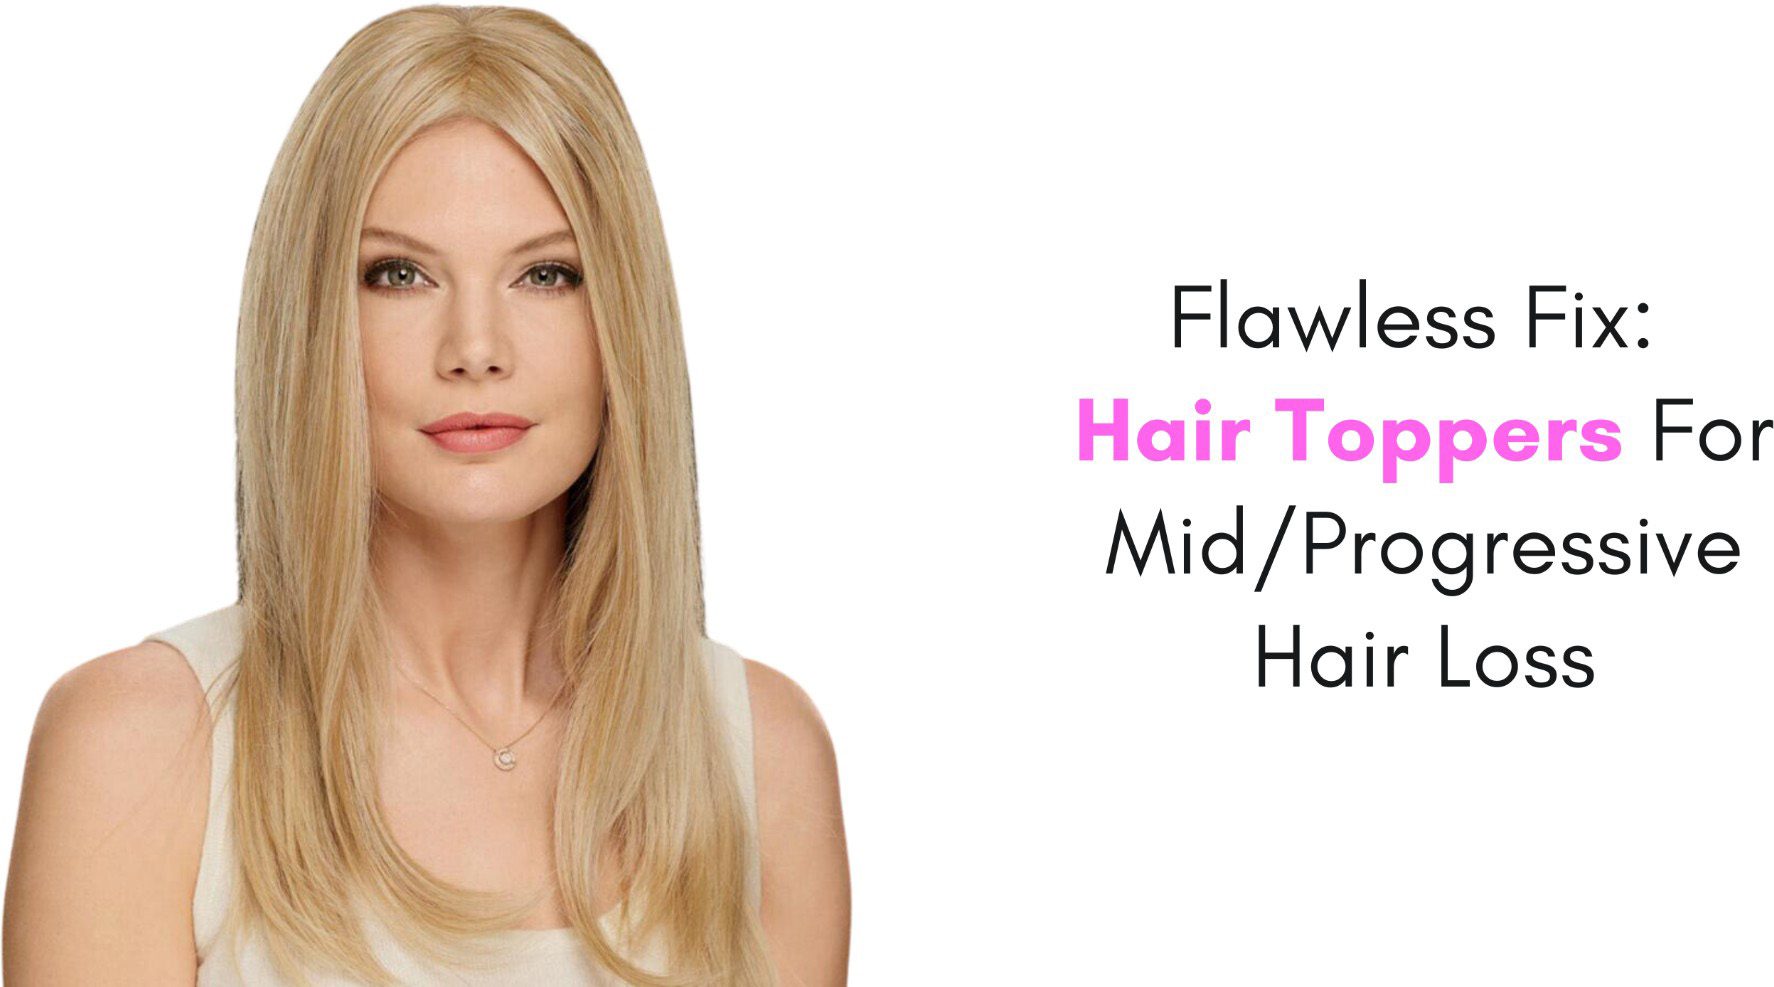 Flawless Fix: Hair Toppers For Mid/Progressive Hair Loss